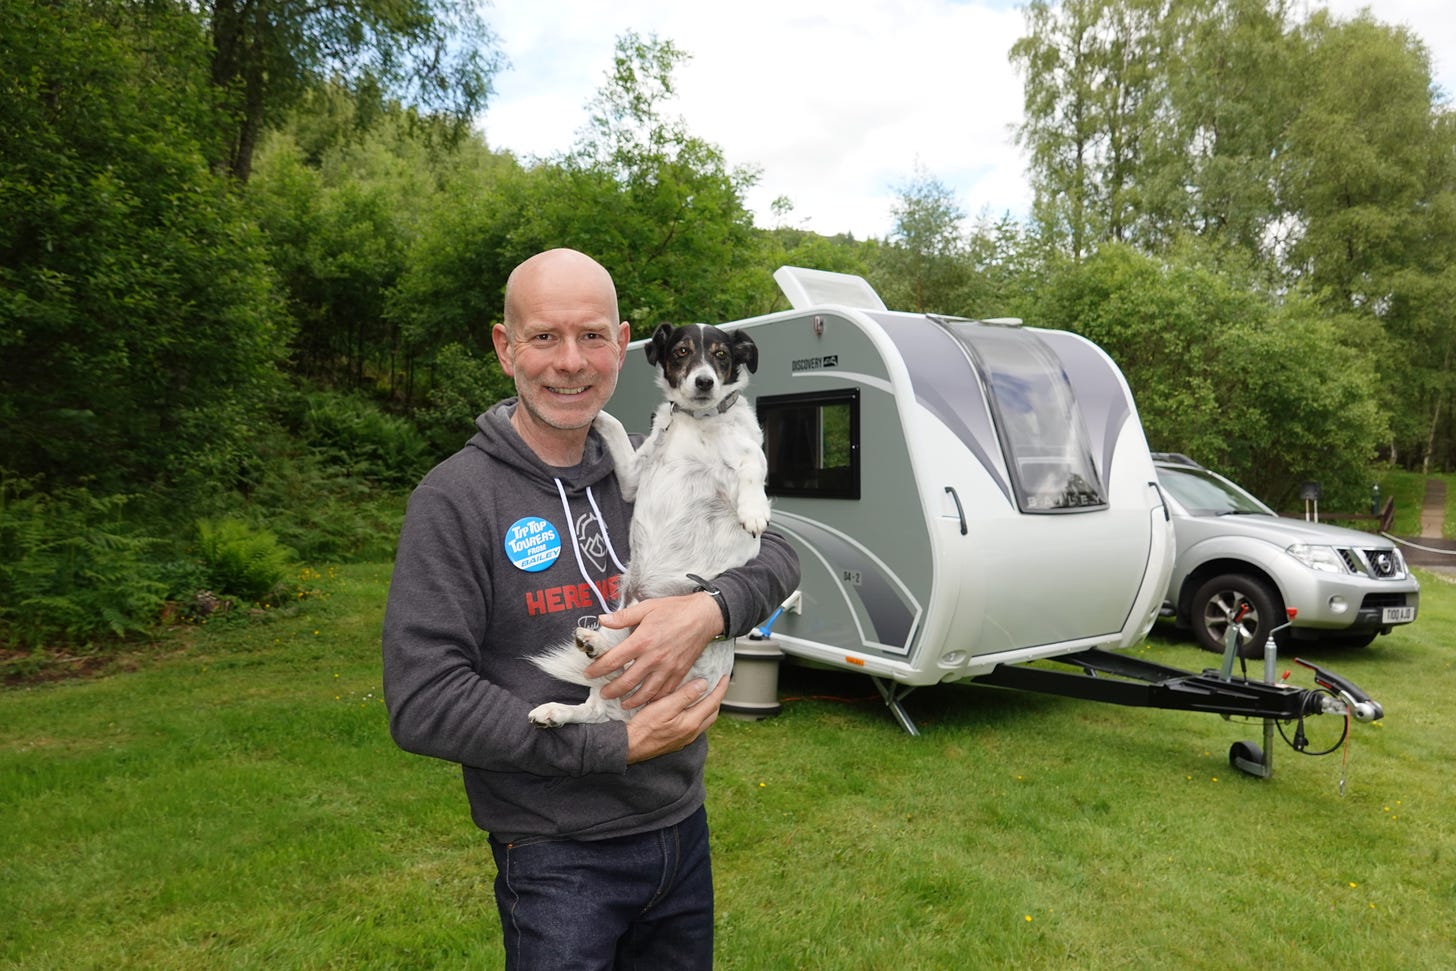 Andrew Ditton. Bailey Discovery D4-2. Caravan. Dog with caravan. Caravanning with pets. 